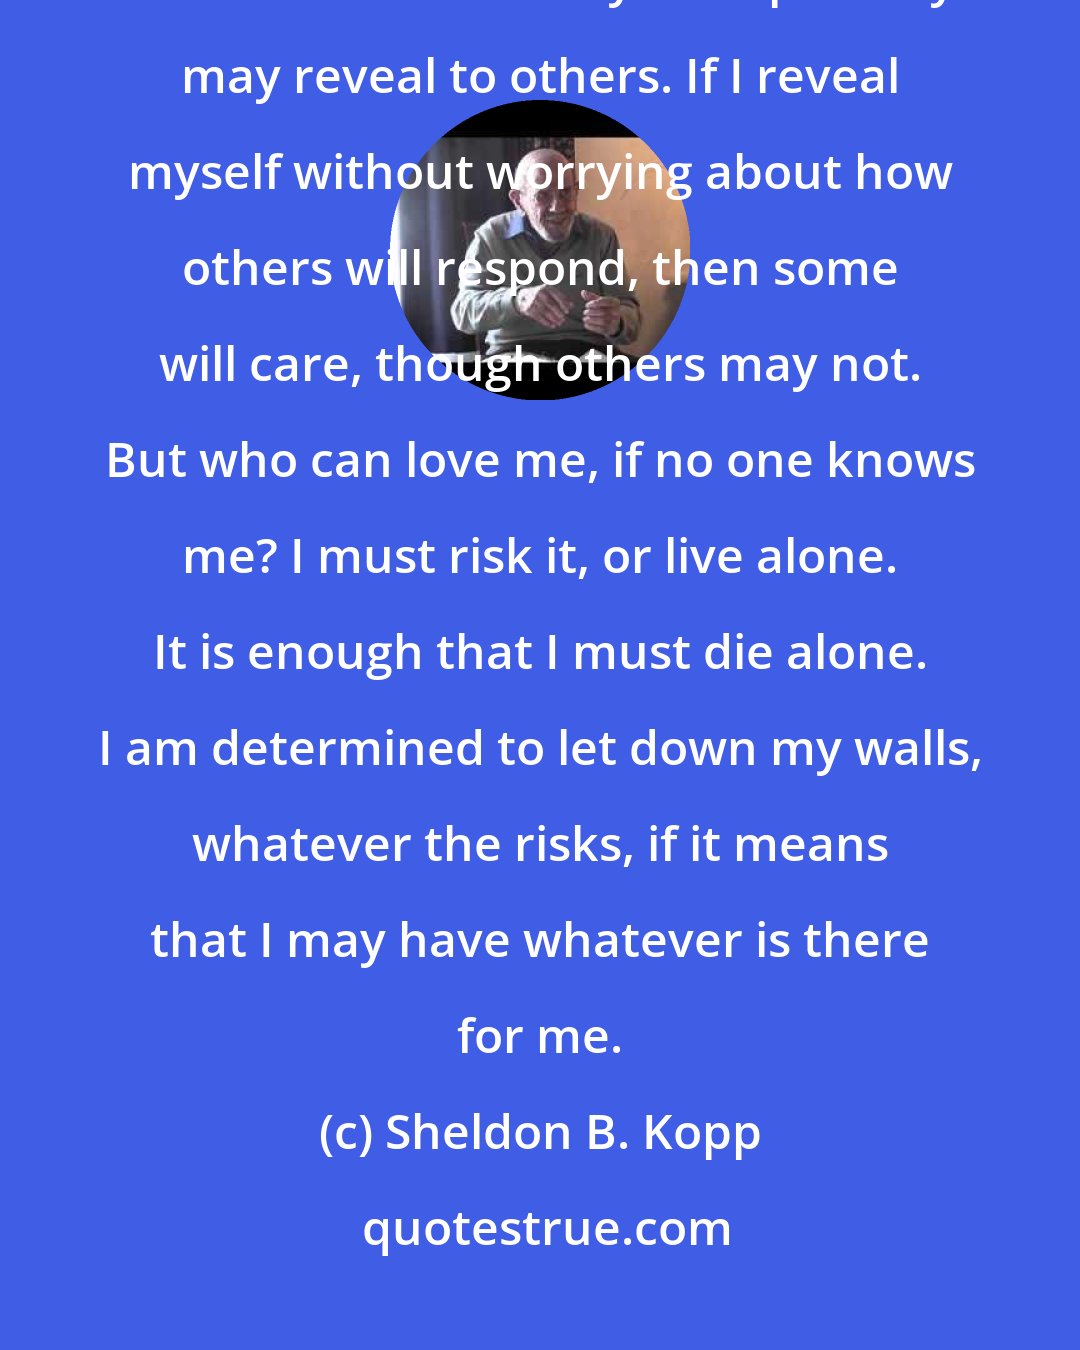 Sheldon B. Kopp: If I am transparent enough to myself, then I can become less afraid of those hidden selves that my transparency may reveal to others. If I reveal myself without worrying about how others will respond, then some will care, though others may not. But who can love me, if no one knows me? I must risk it, or live alone. It is enough that I must die alone. I am determined to let down my walls, whatever the risks, if it means that I may have whatever is there for me.